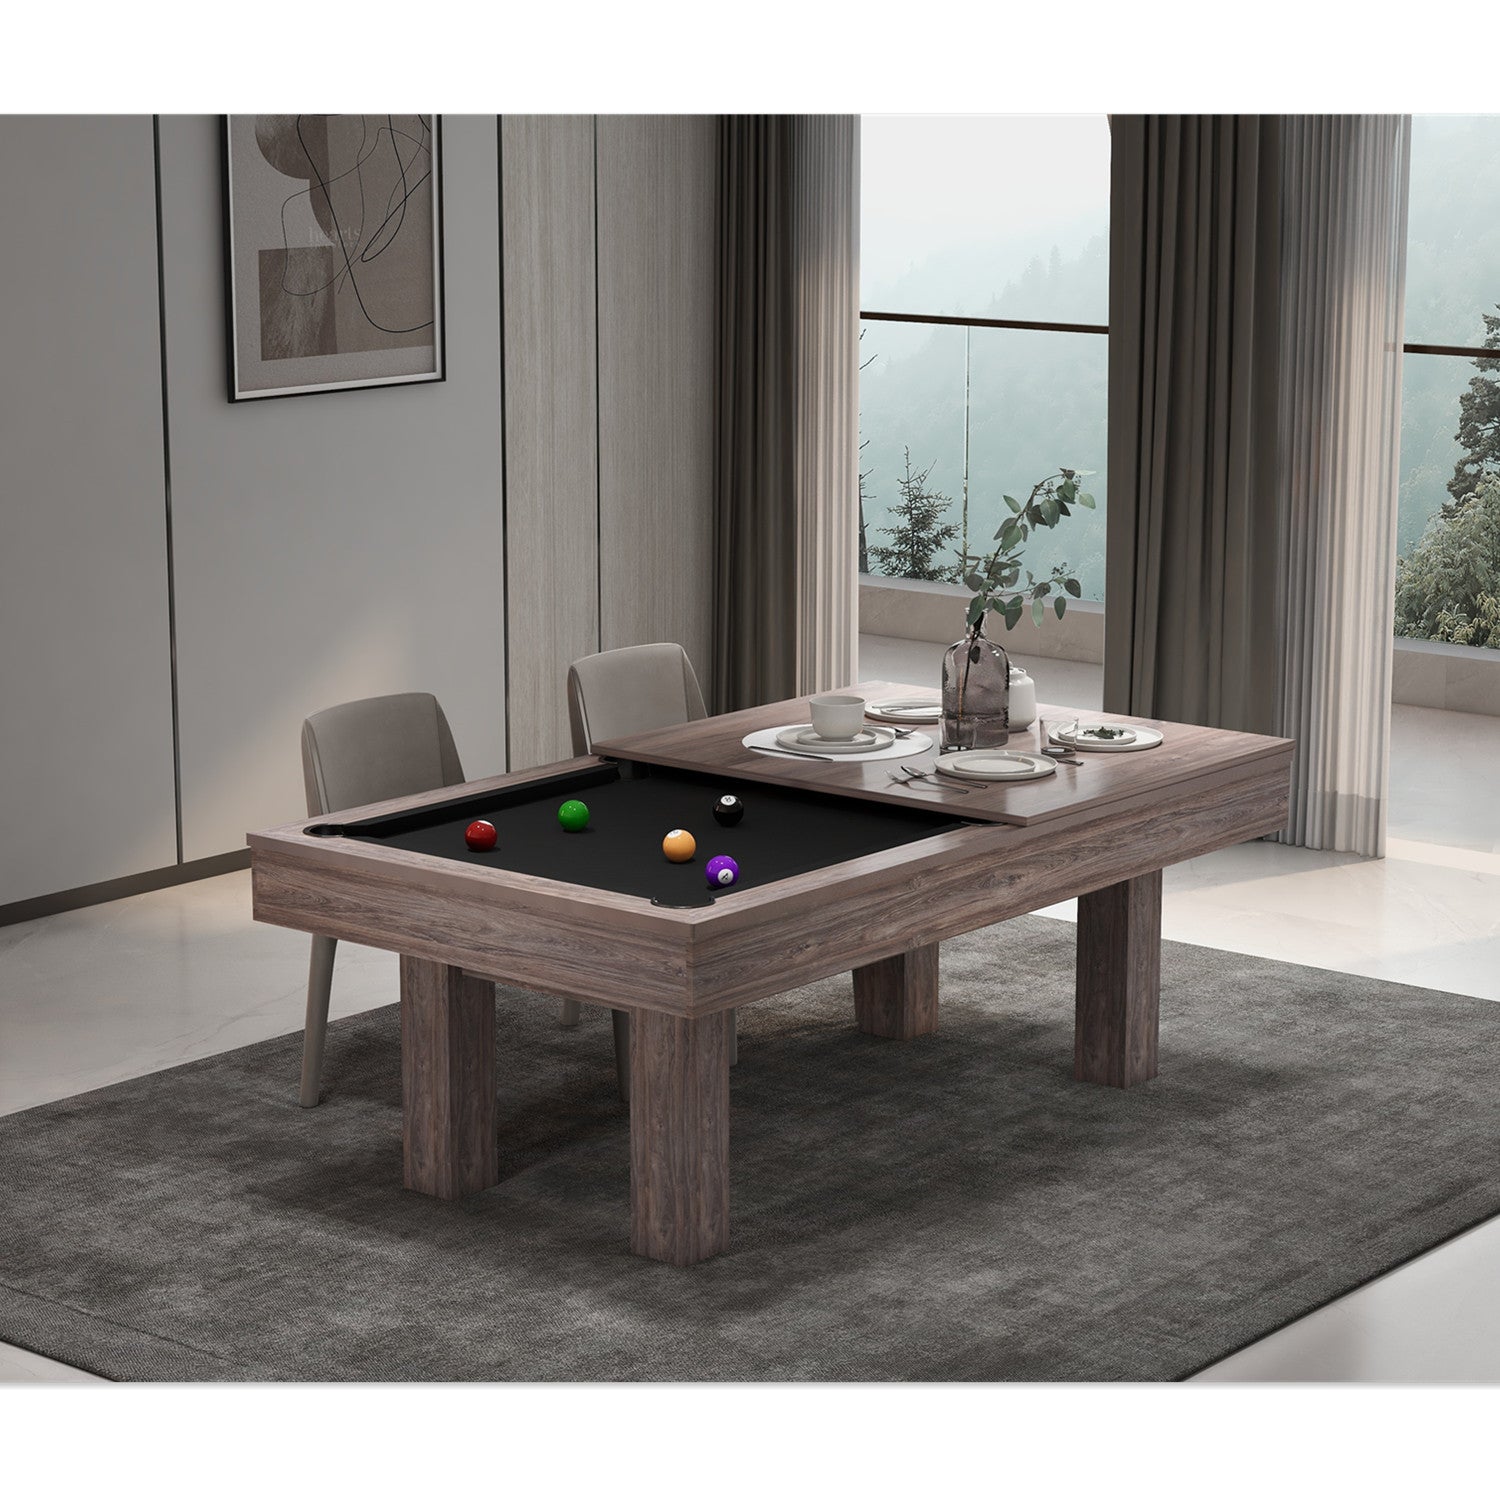 Sidra Dining Pool Table - Slate 3IN1 7FT